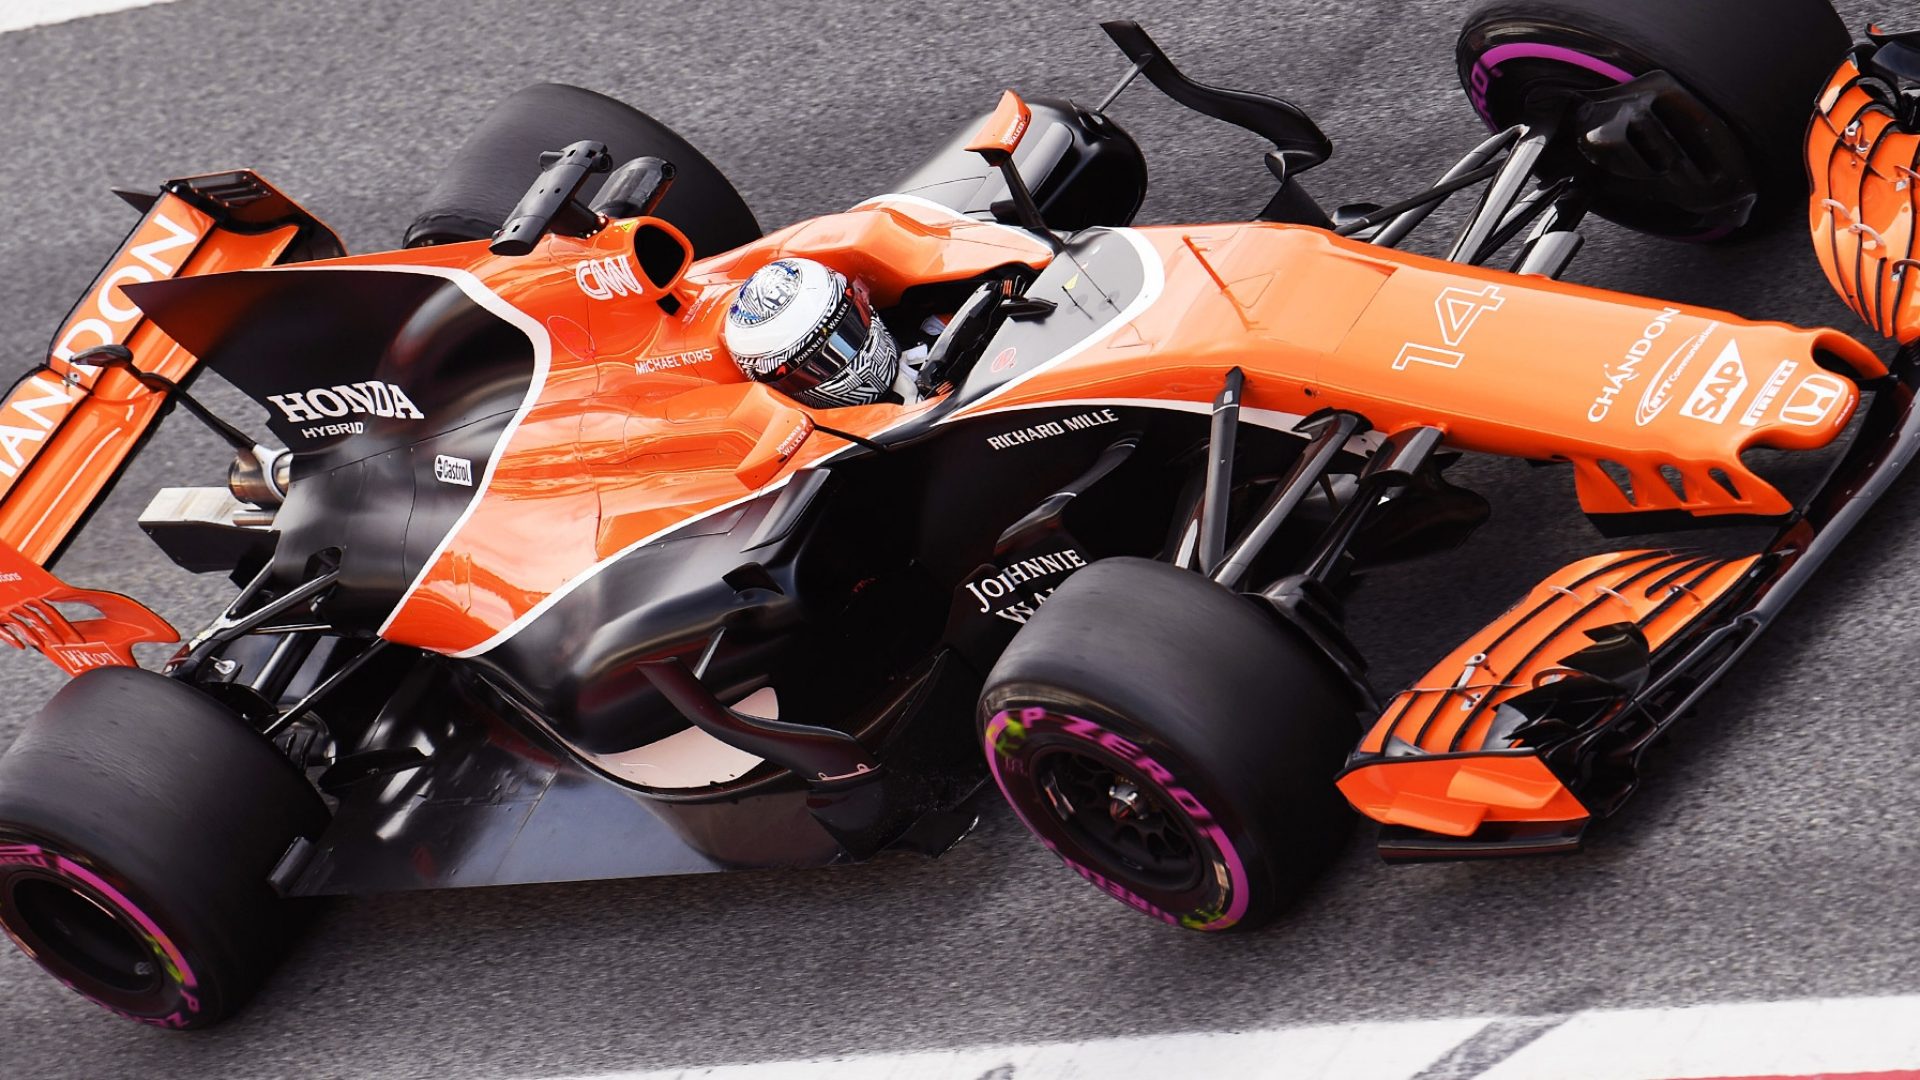 McLaren, McLaren, McLaren. What are we going to do about McLaren? Everything about this team tells us that we should be looking at a perennial winner. But we aren't. The team continues to struggle with their Honda engine and we should not expect many top 3 finishes. At least not early in the season.